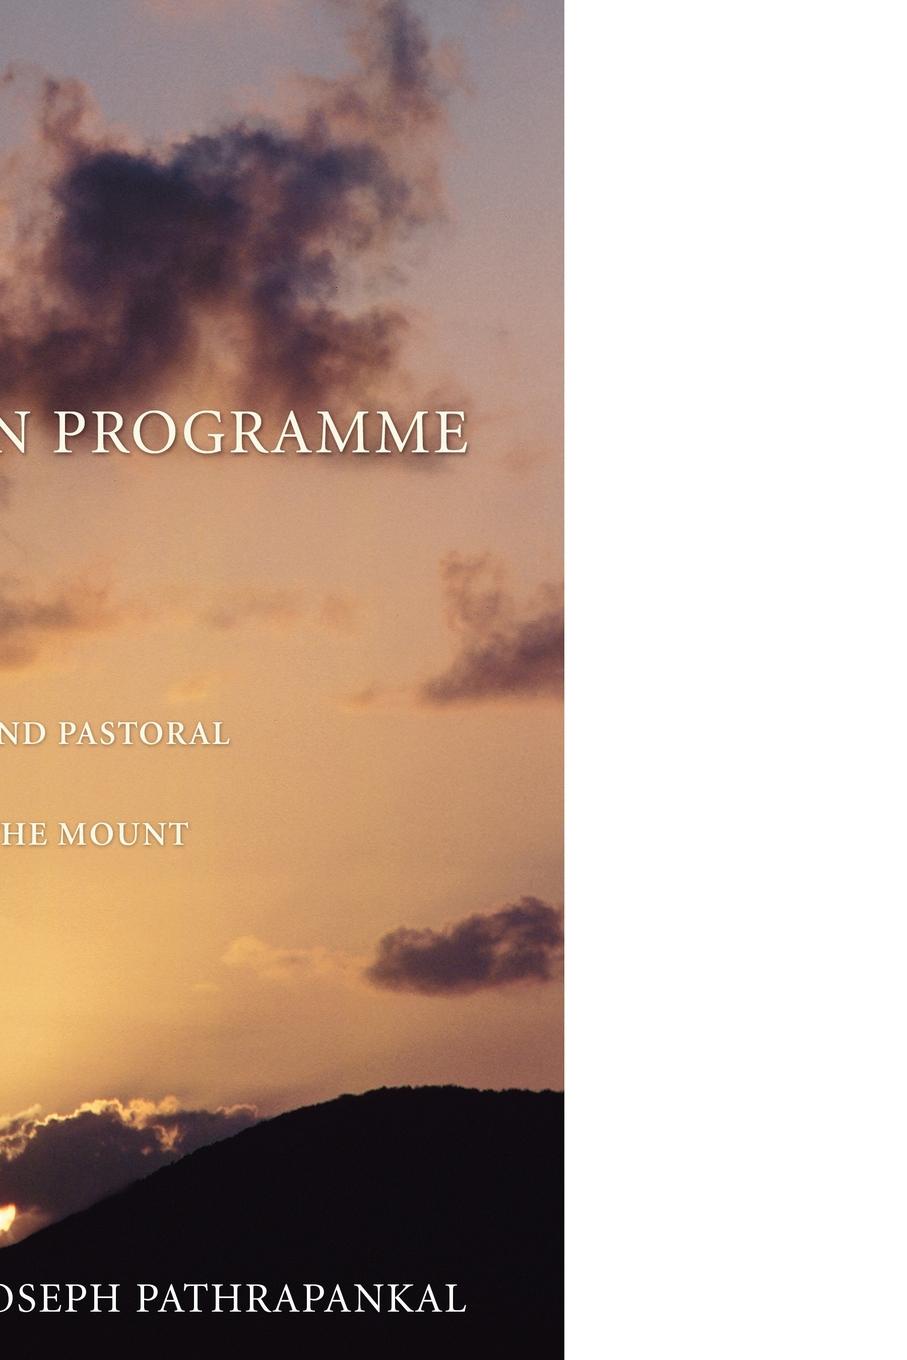 The Christian Programme. A Theological and Pastoral Study of the Sermon on the Mount